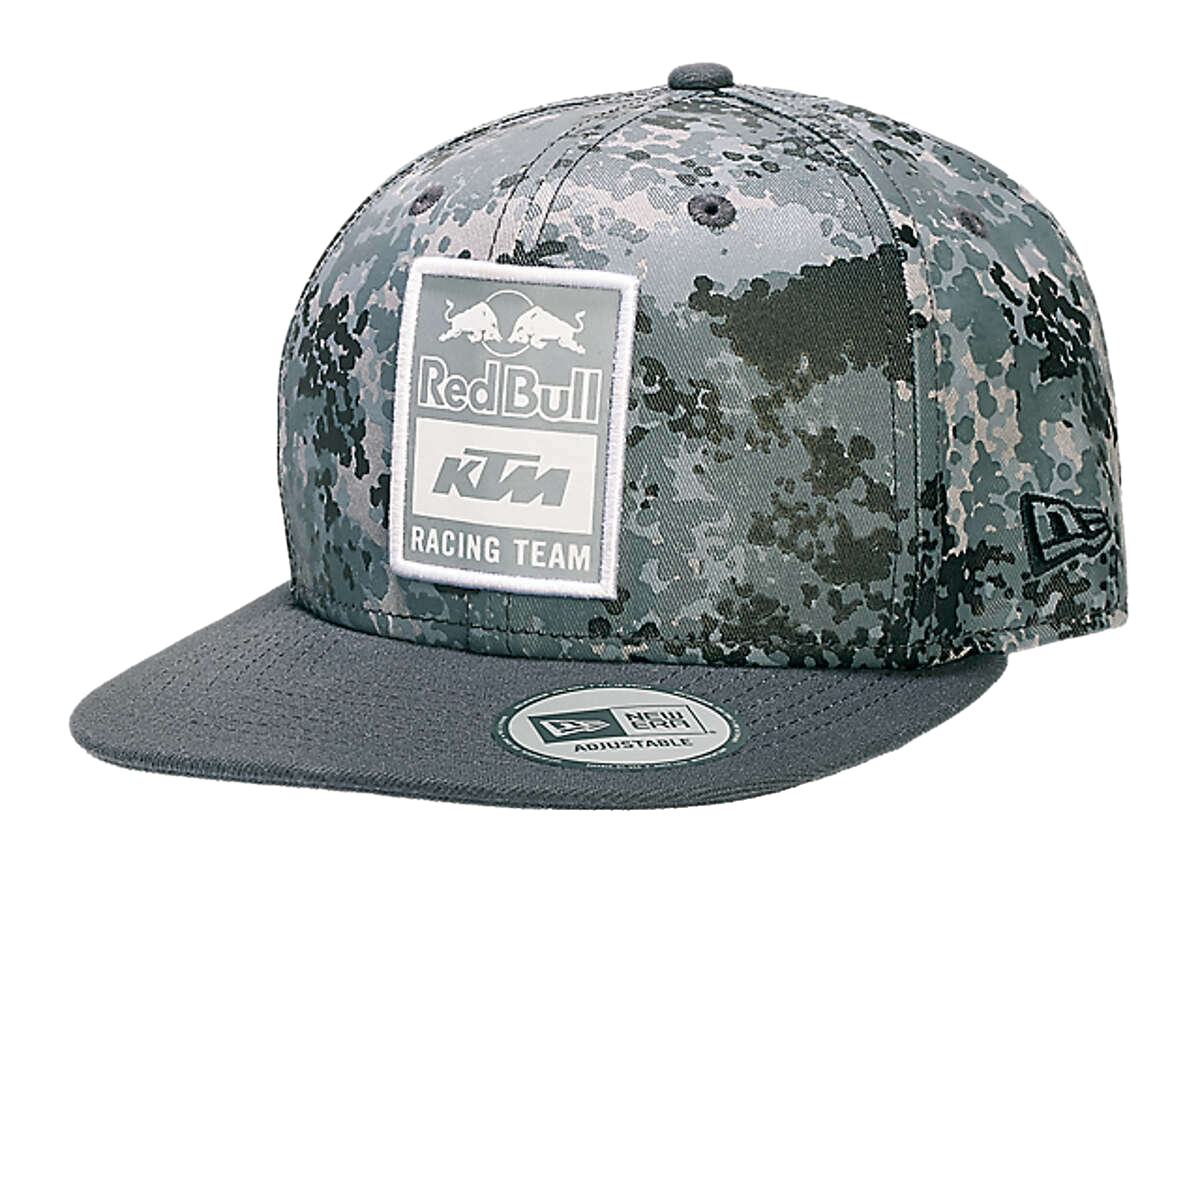 Red Bull Cappellino Snap Back KTM Racing Team Camo - Grey Camouflage